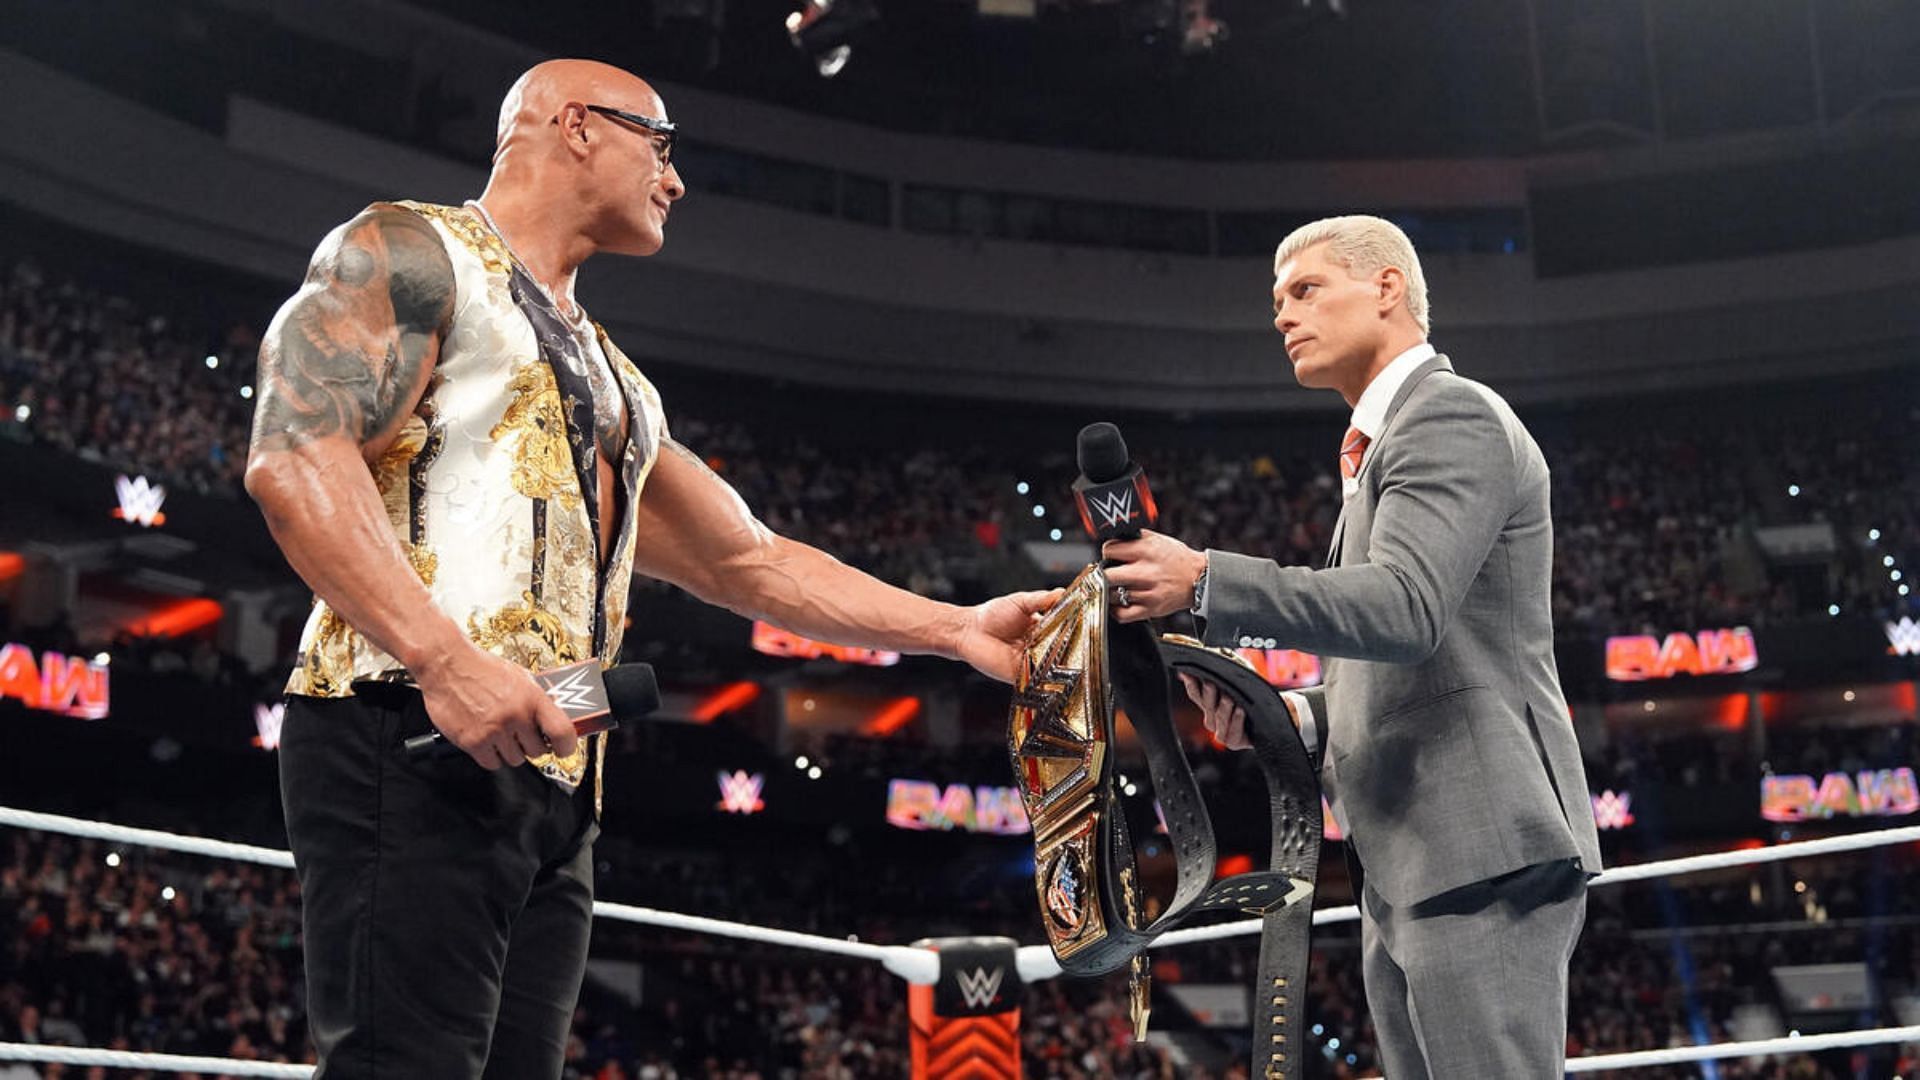 The Rock and Cody Rhodes teased a future match against one another